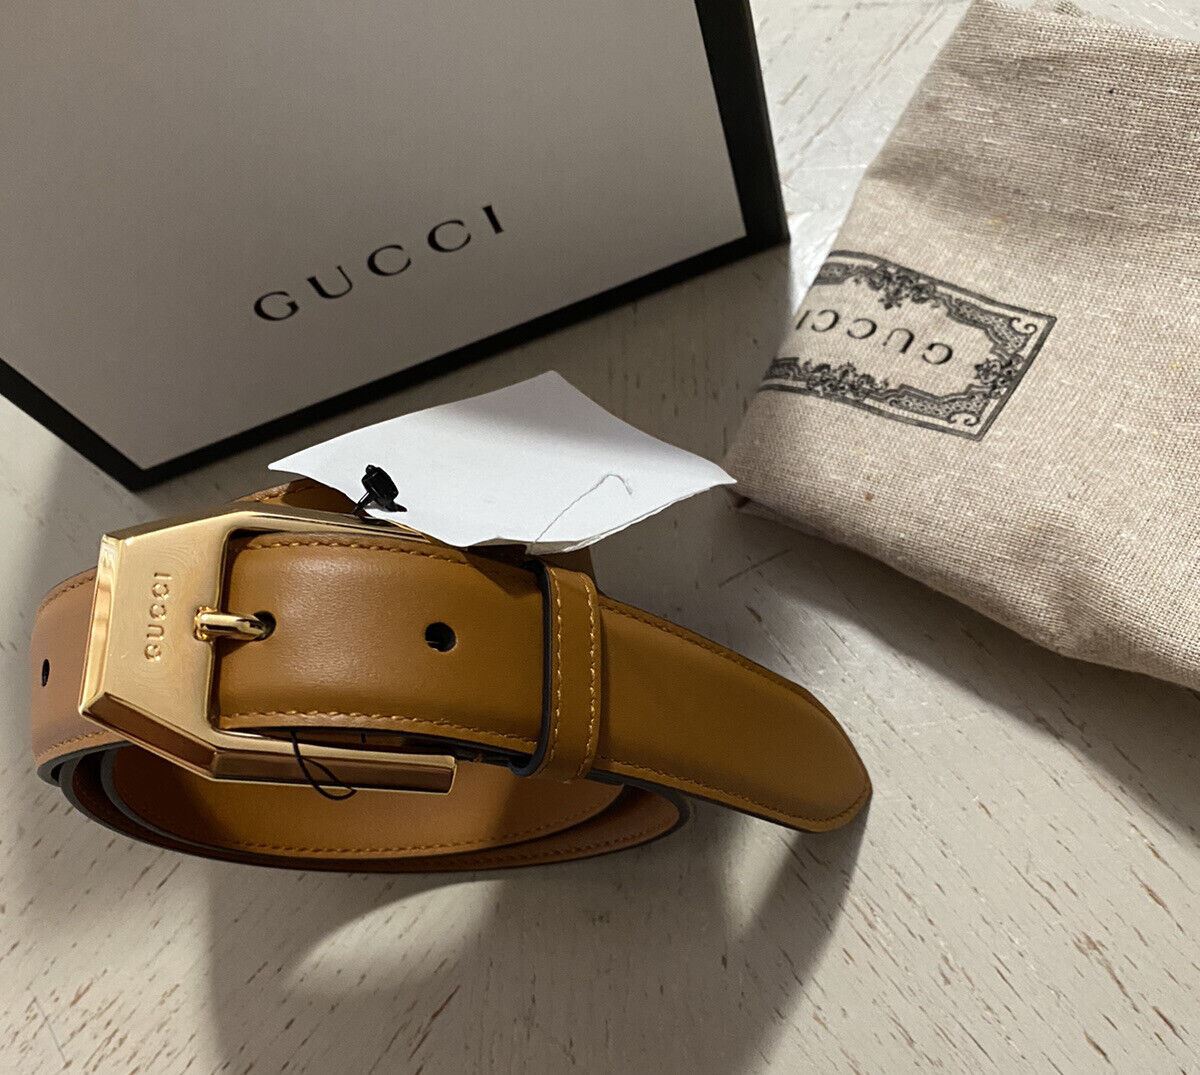 New Gucci Mens Leather Belt Gucci Monogram Brown 95/38 Italy